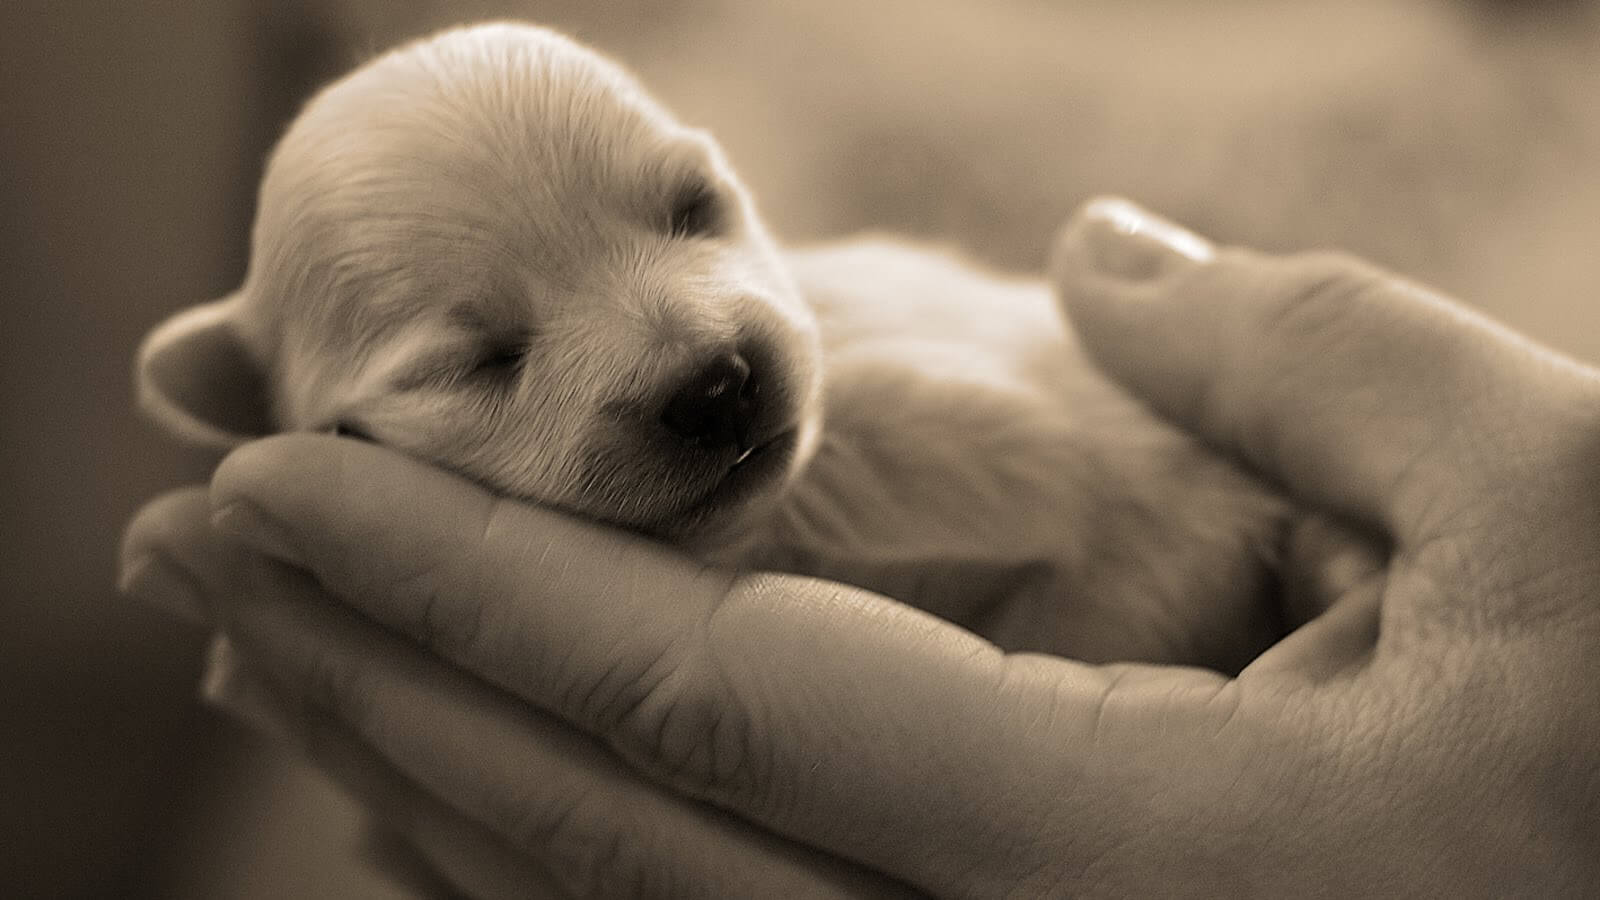 animals-pictures-cute-dog-at-hands